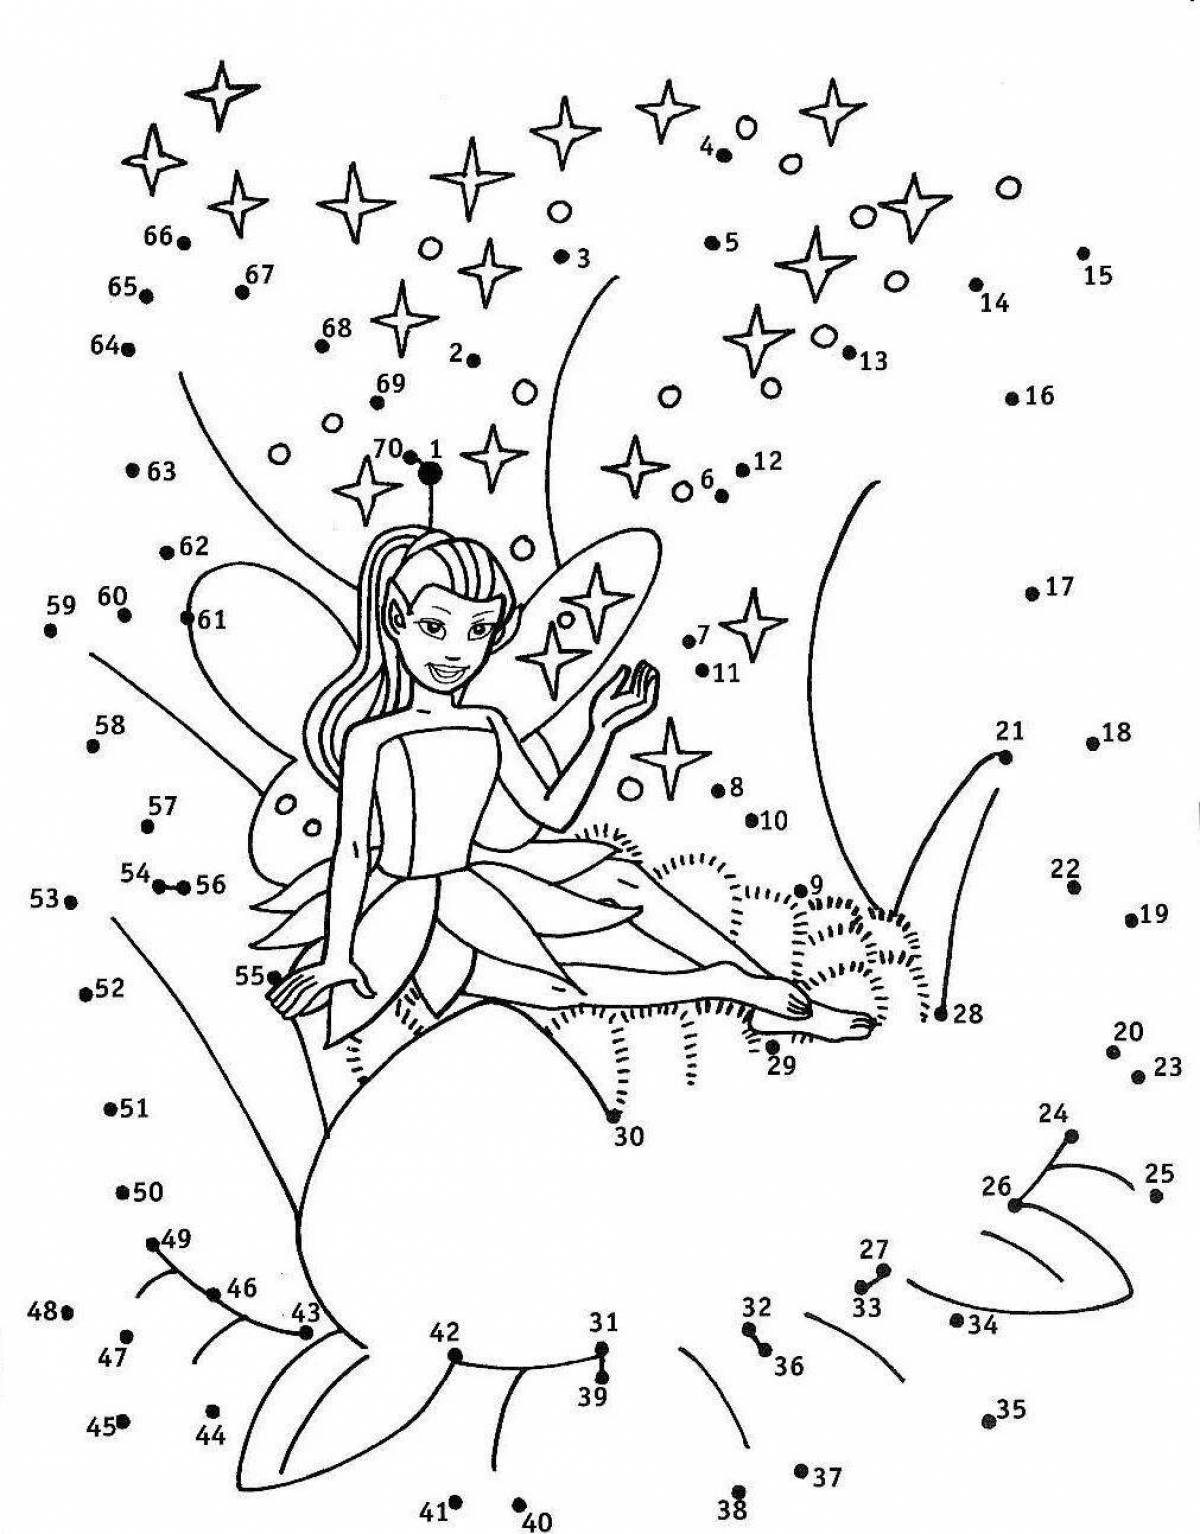 Joyful connect by numbers coloring page